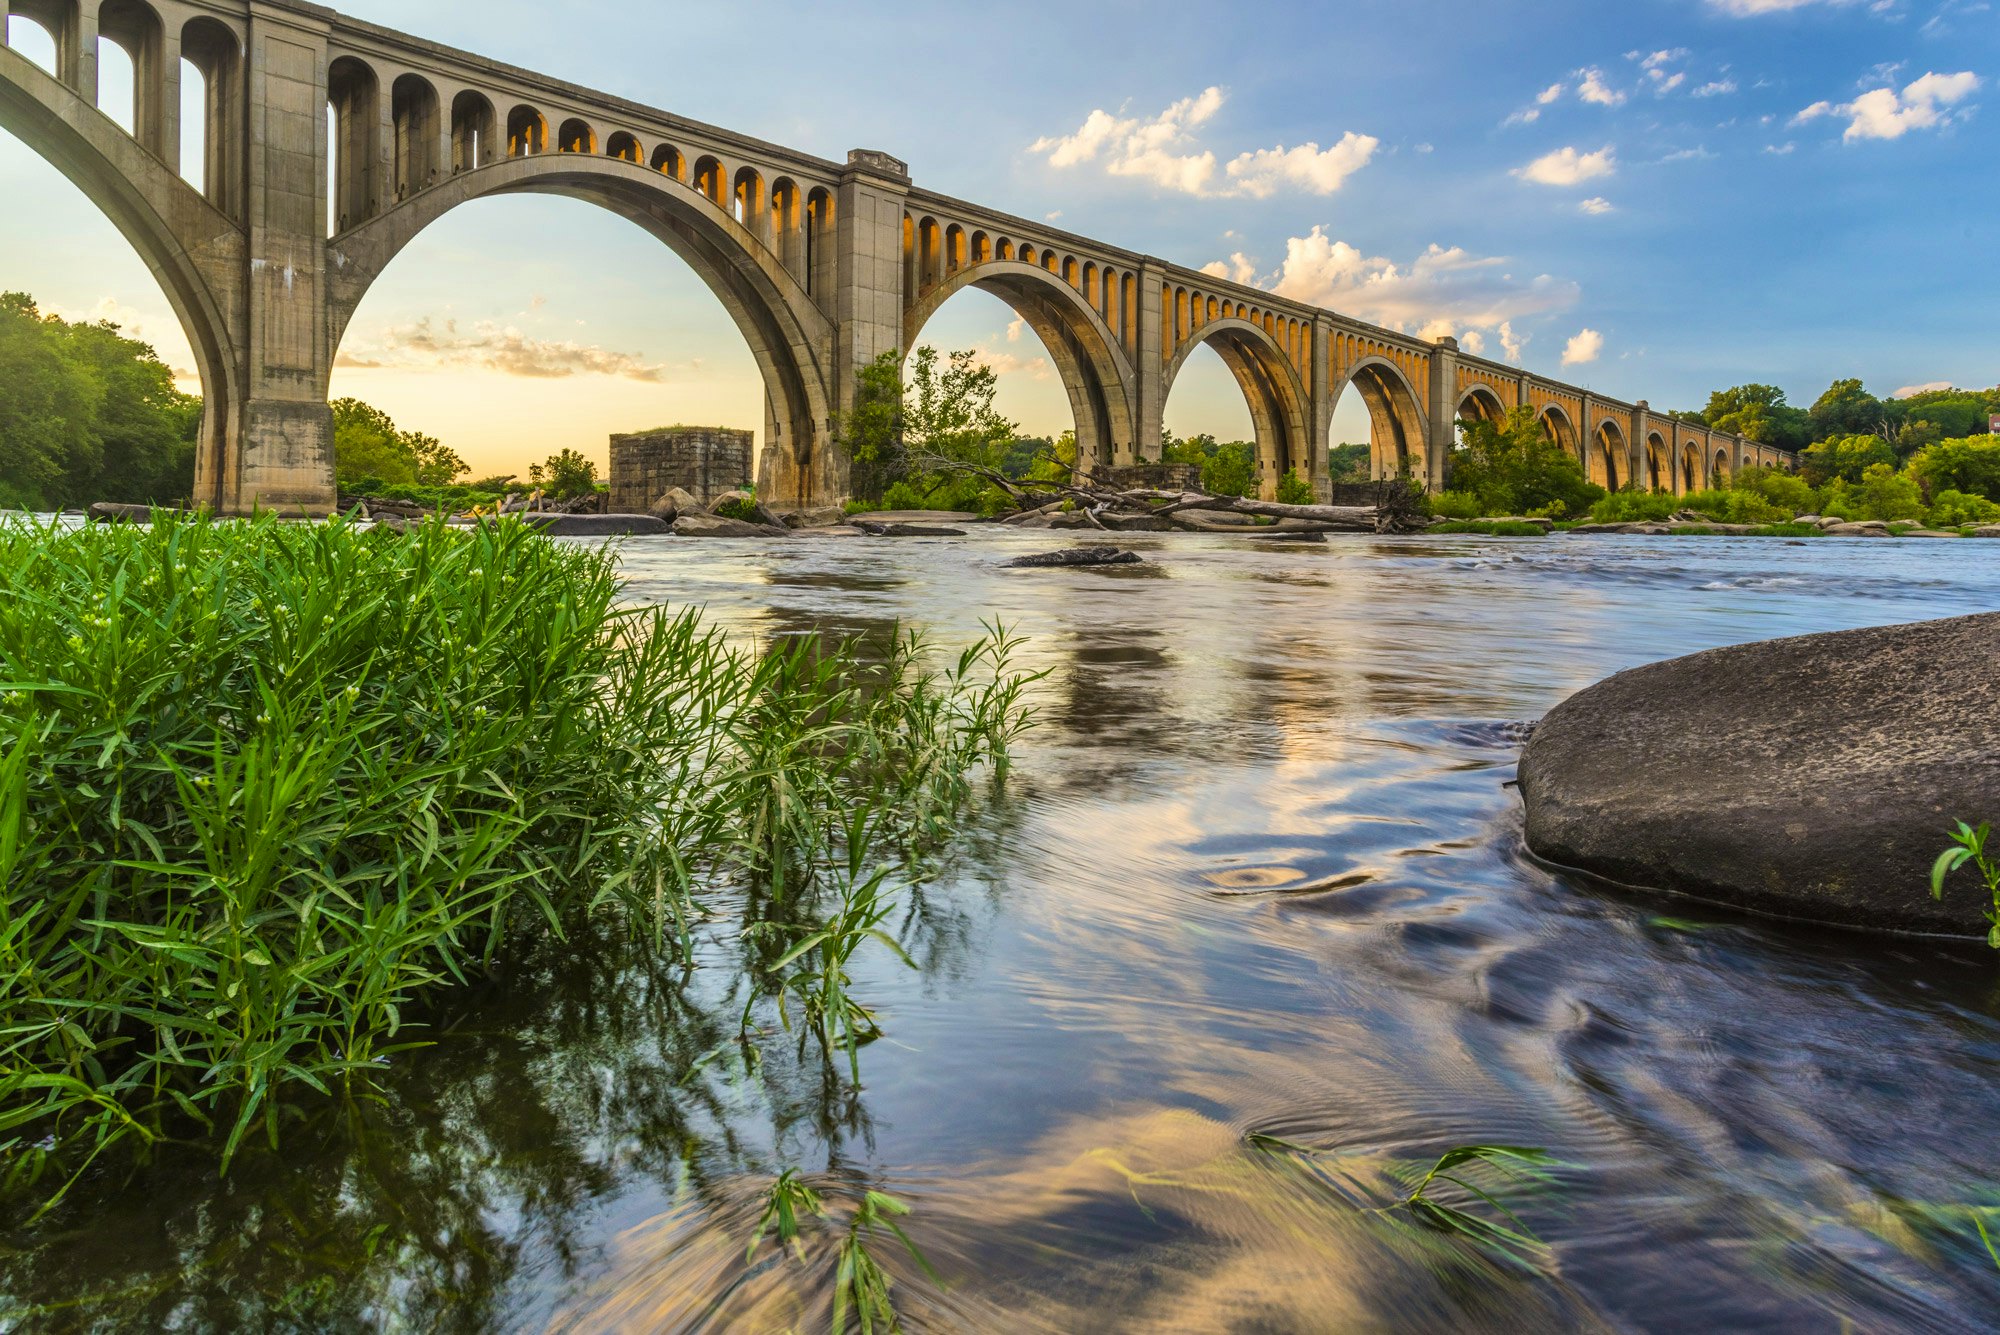 Cyclists, strollers and adrenaline-junkies alike are all drawn to Richmond’s James Rivers © Xavier Ascanio / Shutterstock